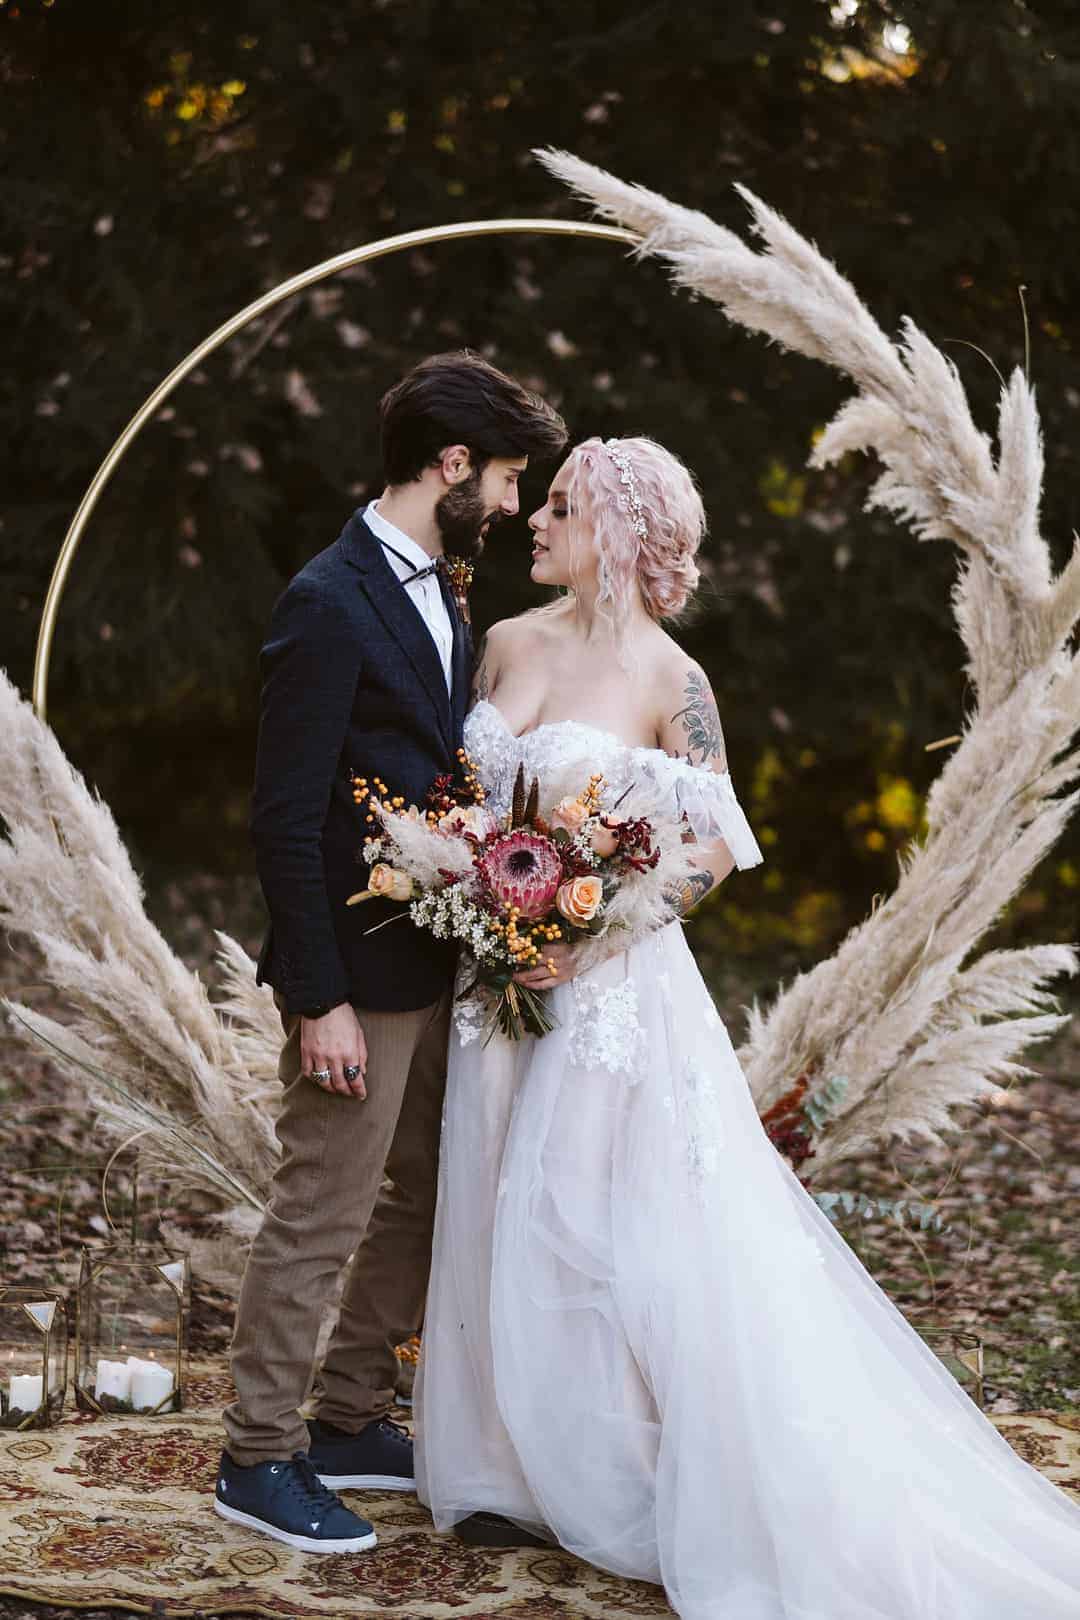 https://www.bespoke-bride.com/wp-content/uploads/2021/09/Autumnal-themed-wedding-with-pampas-grass-floral-arrangements-Tattooed-bride-with-pink-hair-wearing-an-off-the-shoulder-lace-wedding-dress-18.jpg